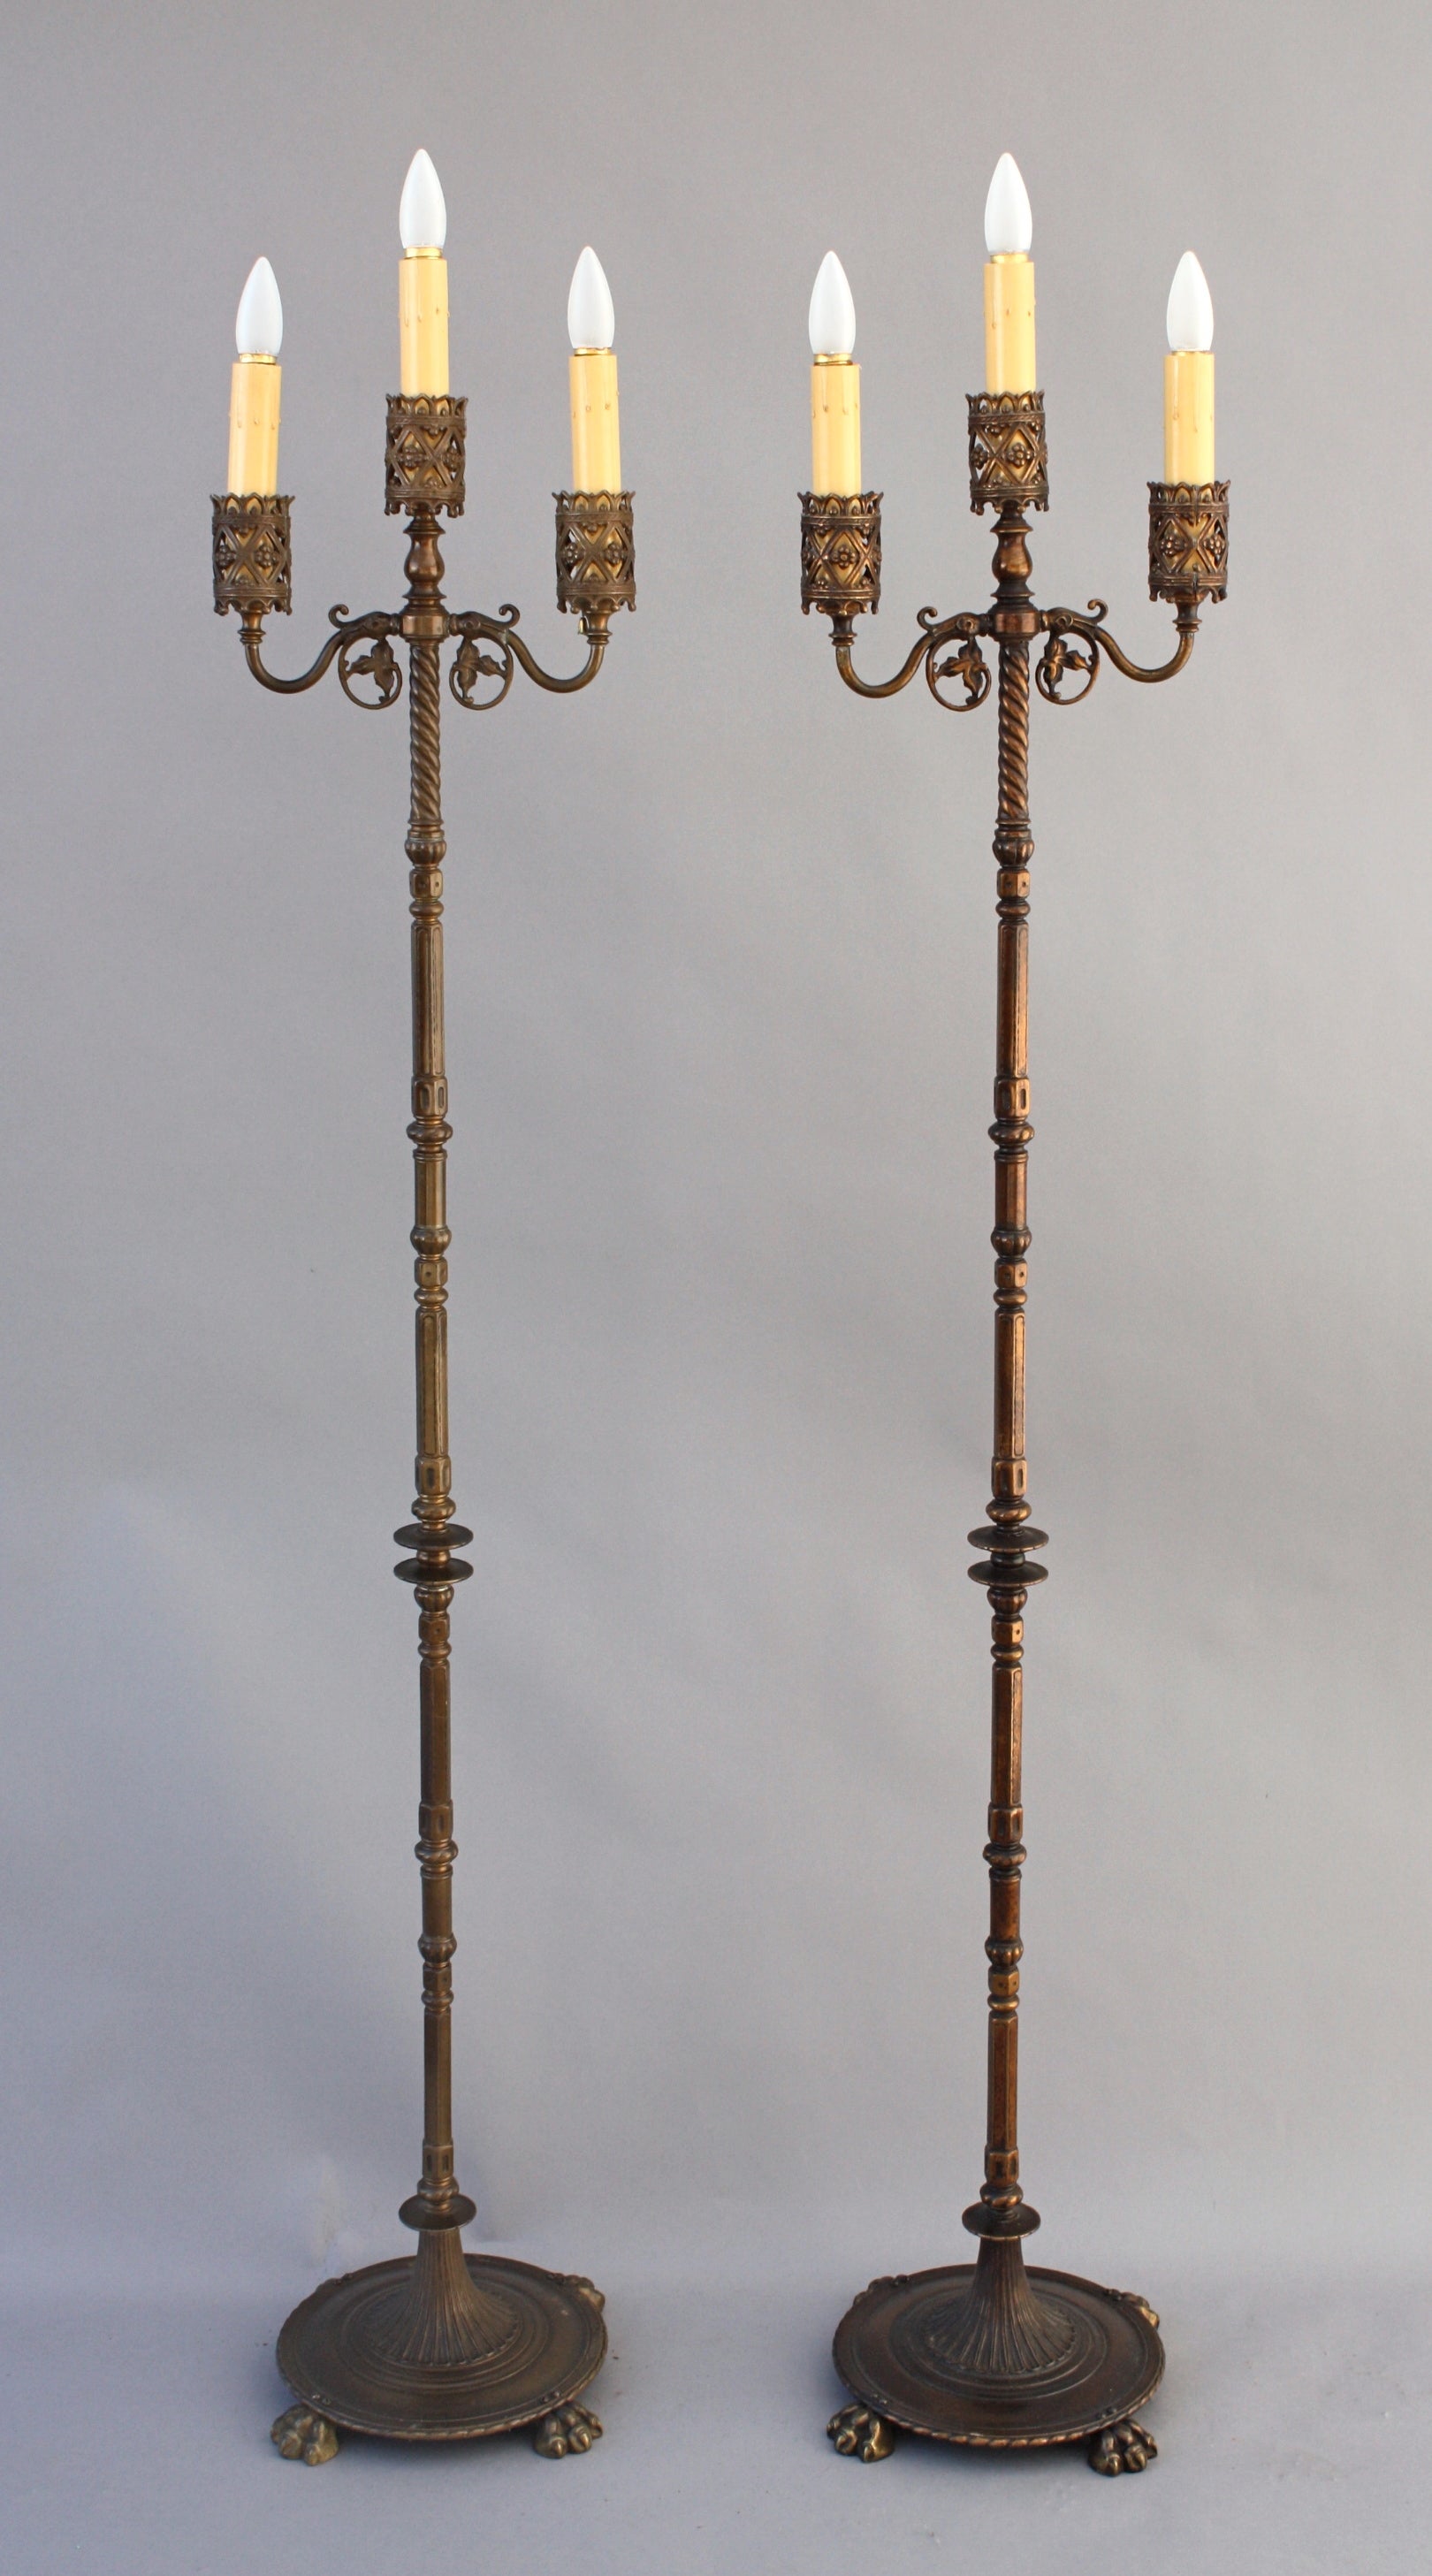  Elegant Pair Of 1920's Oscar Bach Style Torchieres